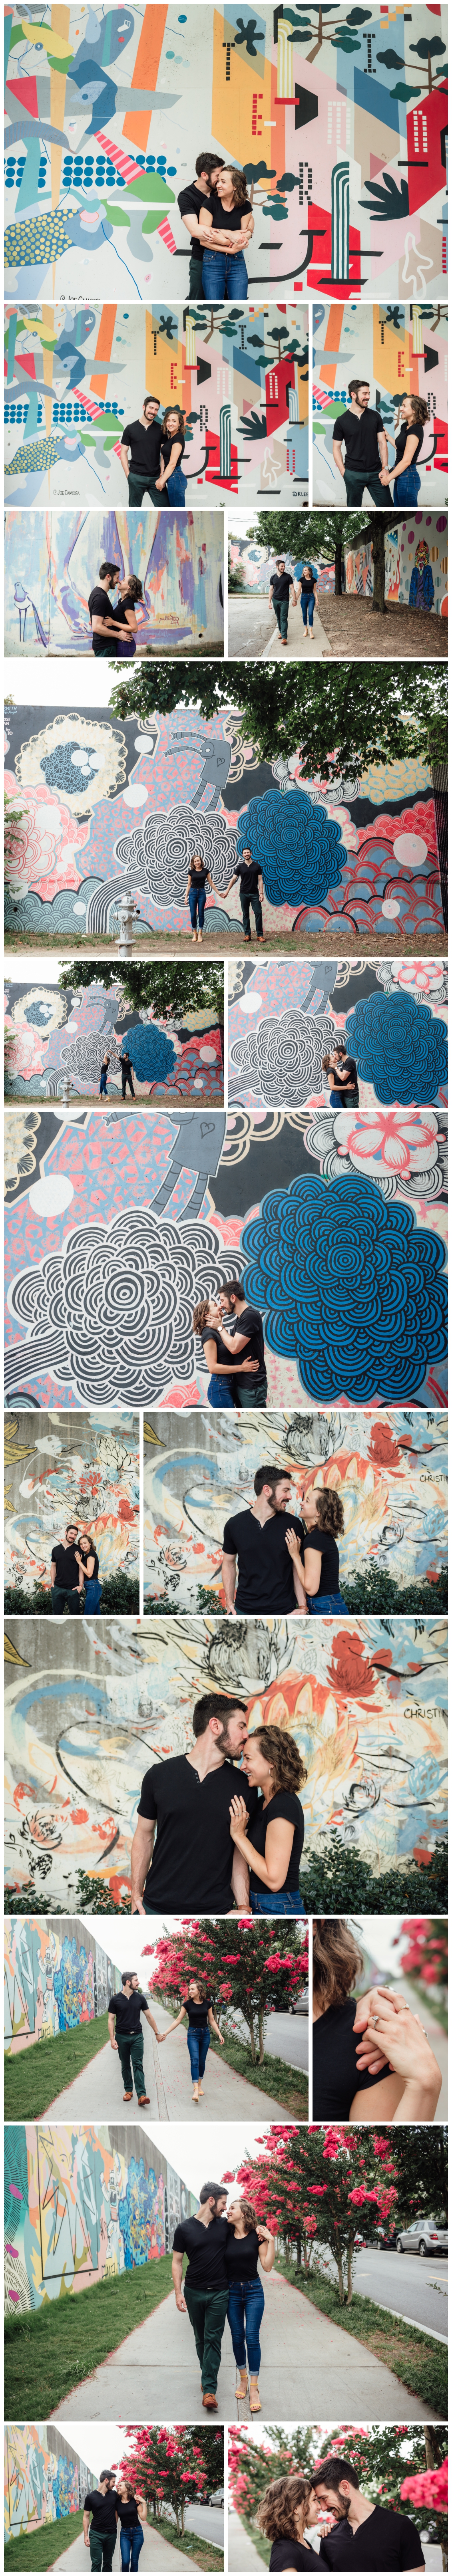 Wylie Street Engagement Session Photography by Christine Quarte Photography Atlanta 